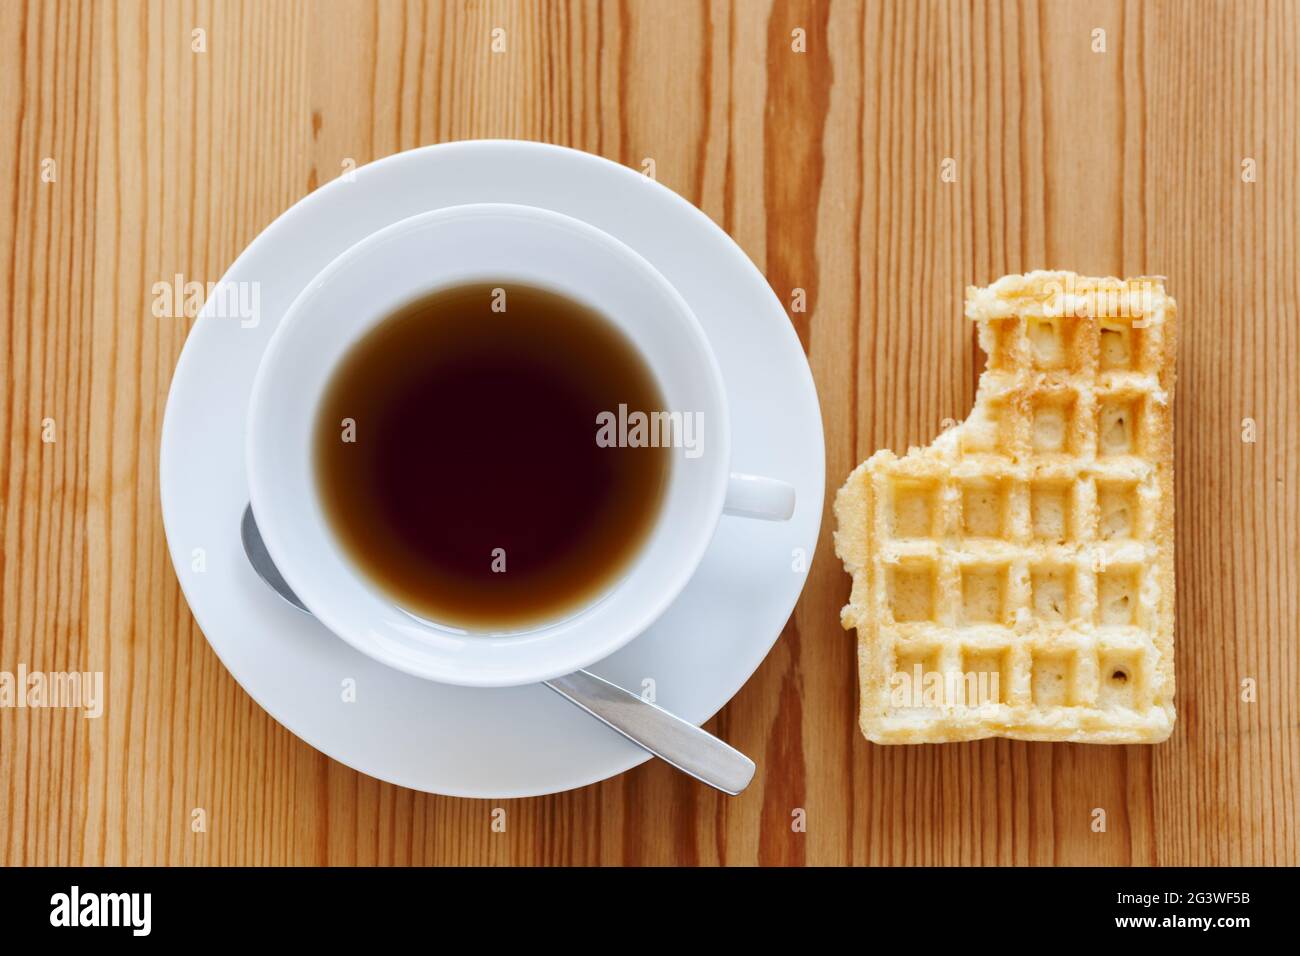 Teacup with biscuit Stock Photo